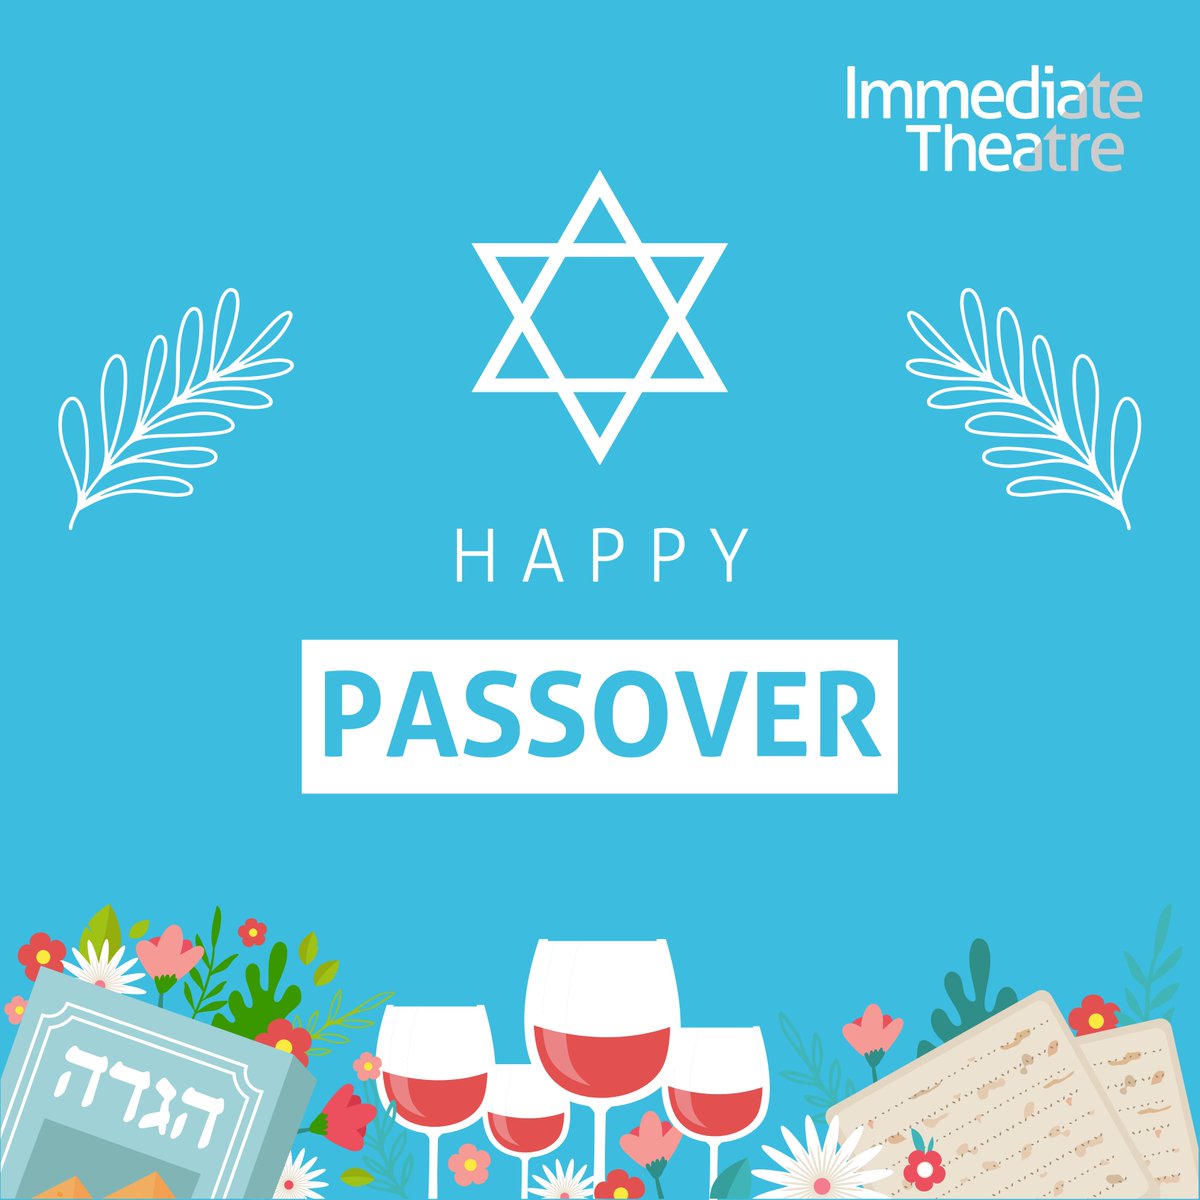 Happy #Passover to everyone celebrating over the coming days💫 Wishing you a blessed #celebration from everyone here at #ImmediateTheatre 🎊